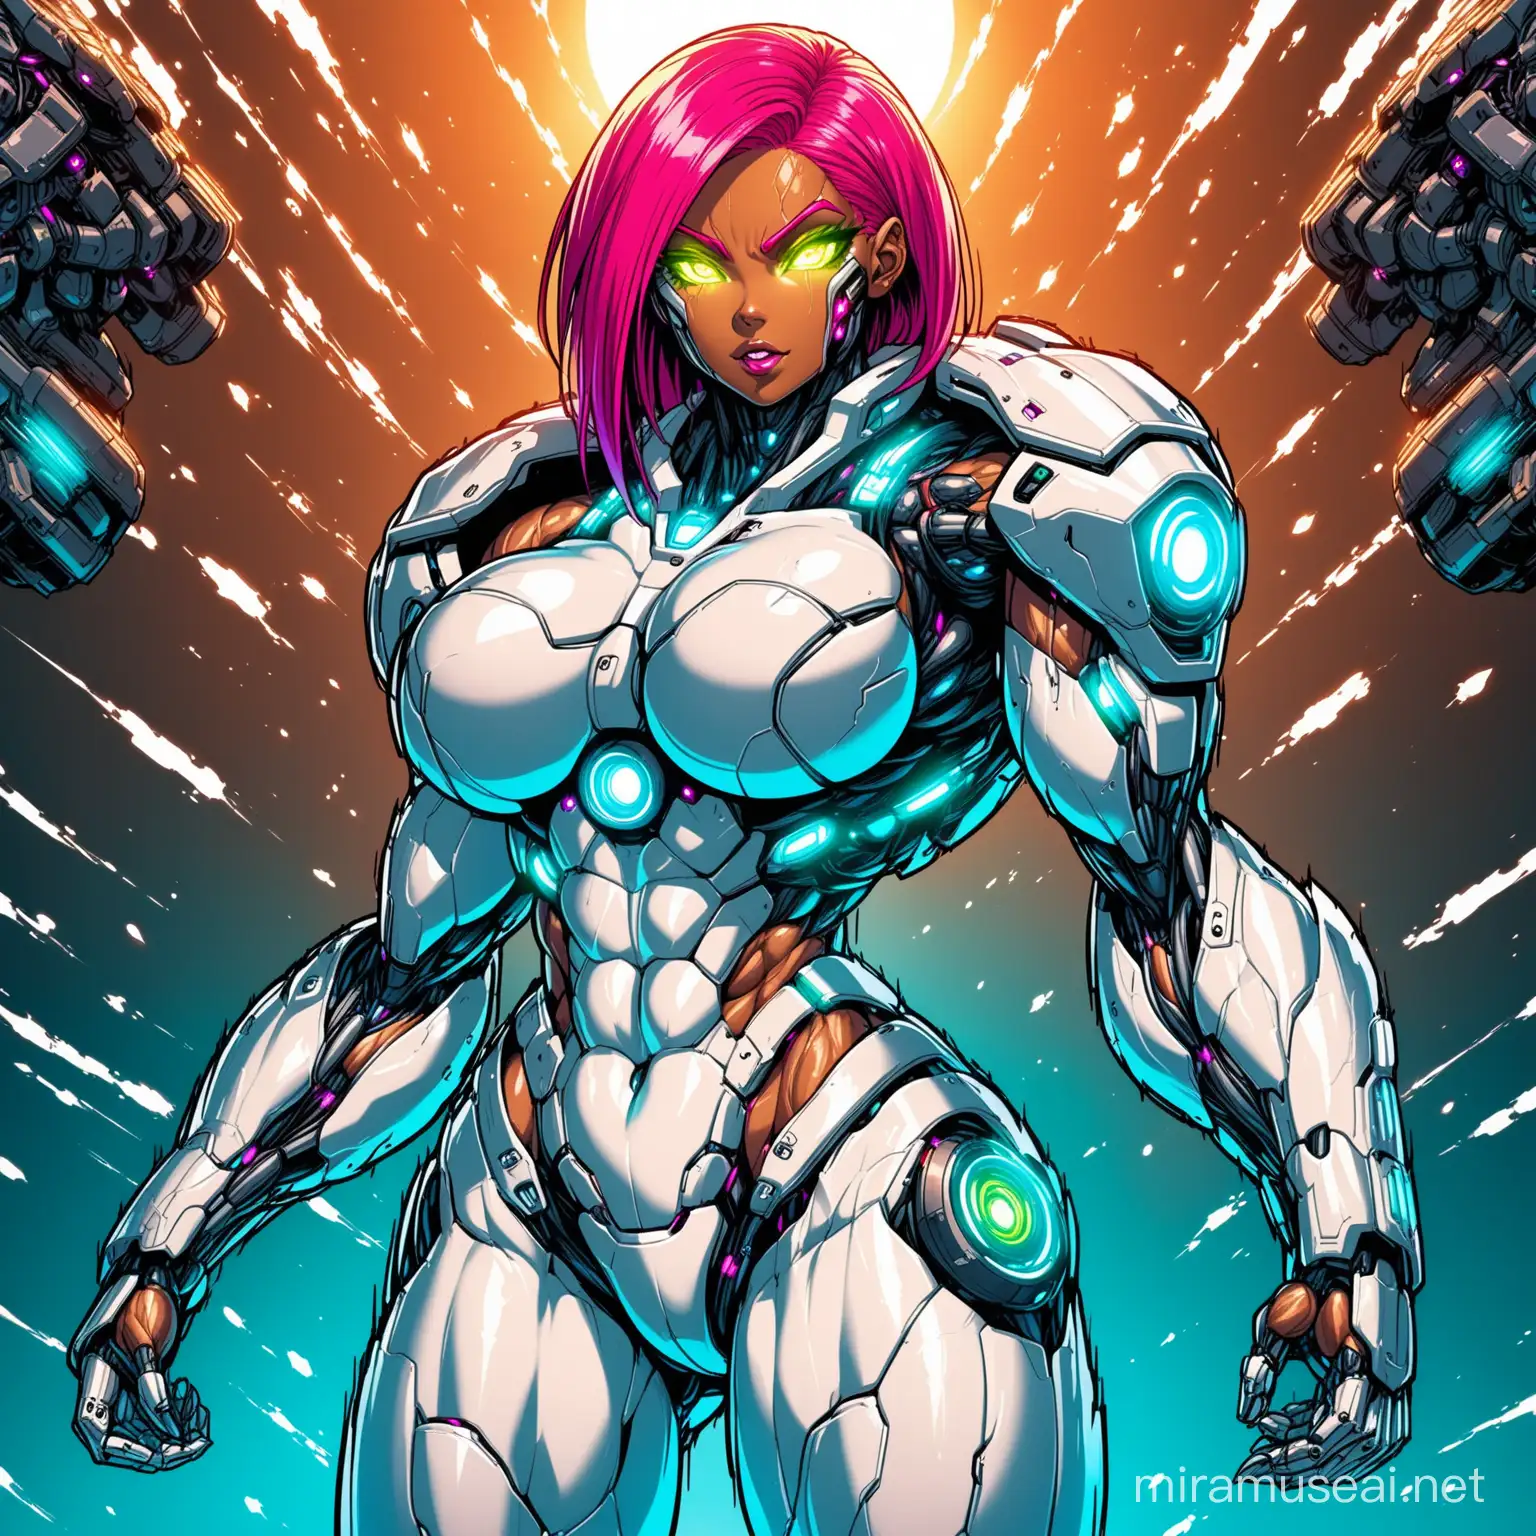 Futuristic Cybernetic Heroine with Vibrant Features and Bulletproof Attire